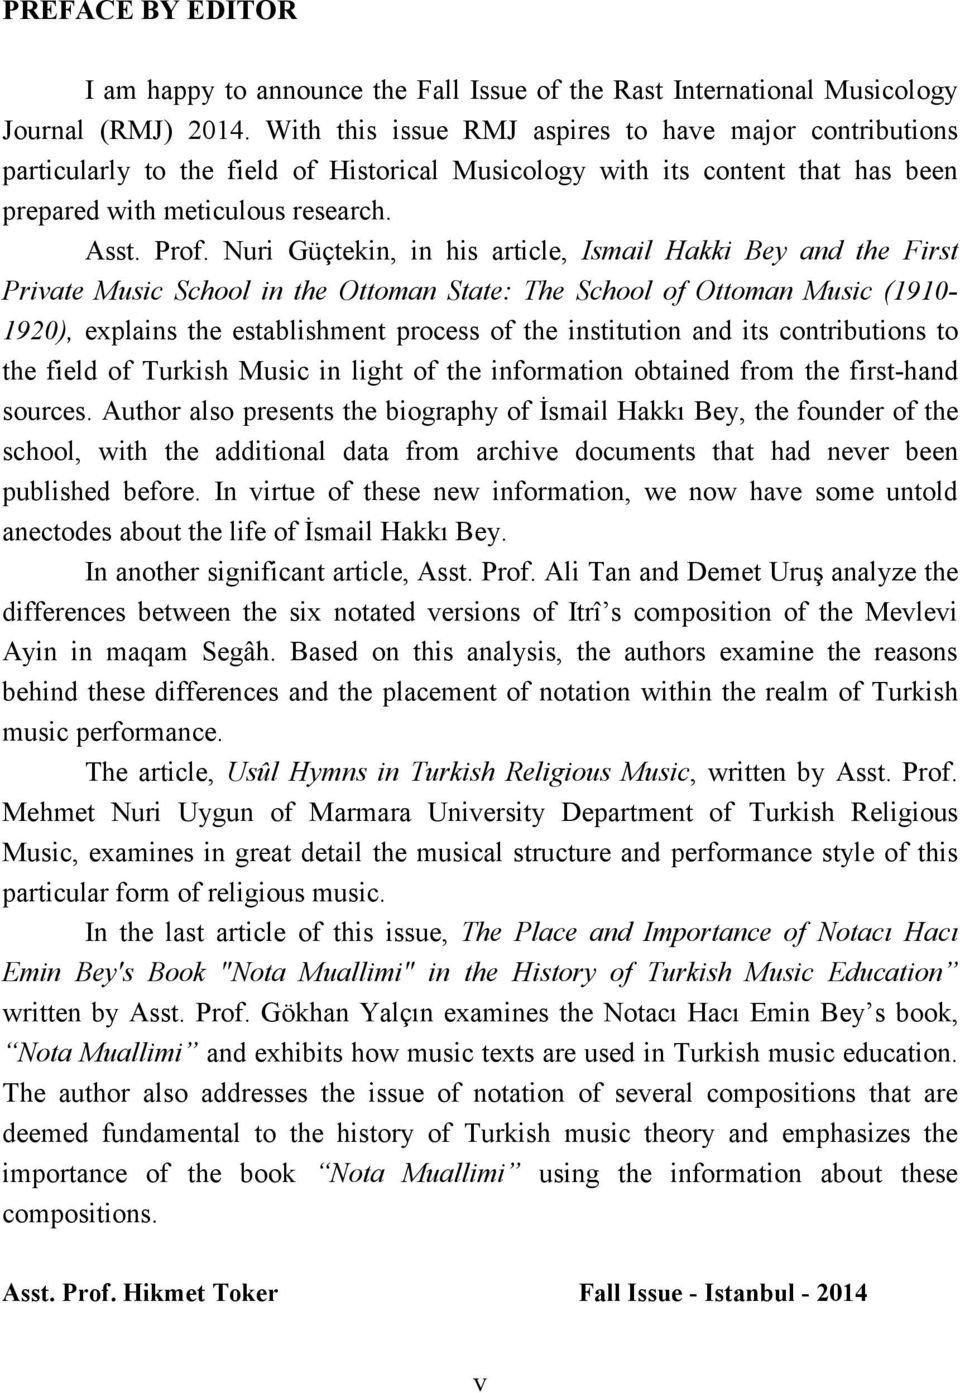 Nuri Güçtekin, in his article, Ismail Hakki Bey and the First Private Music School in the Ottoman State: The School of Ottoman Music (1910-1920), explains the establishment process of the institution